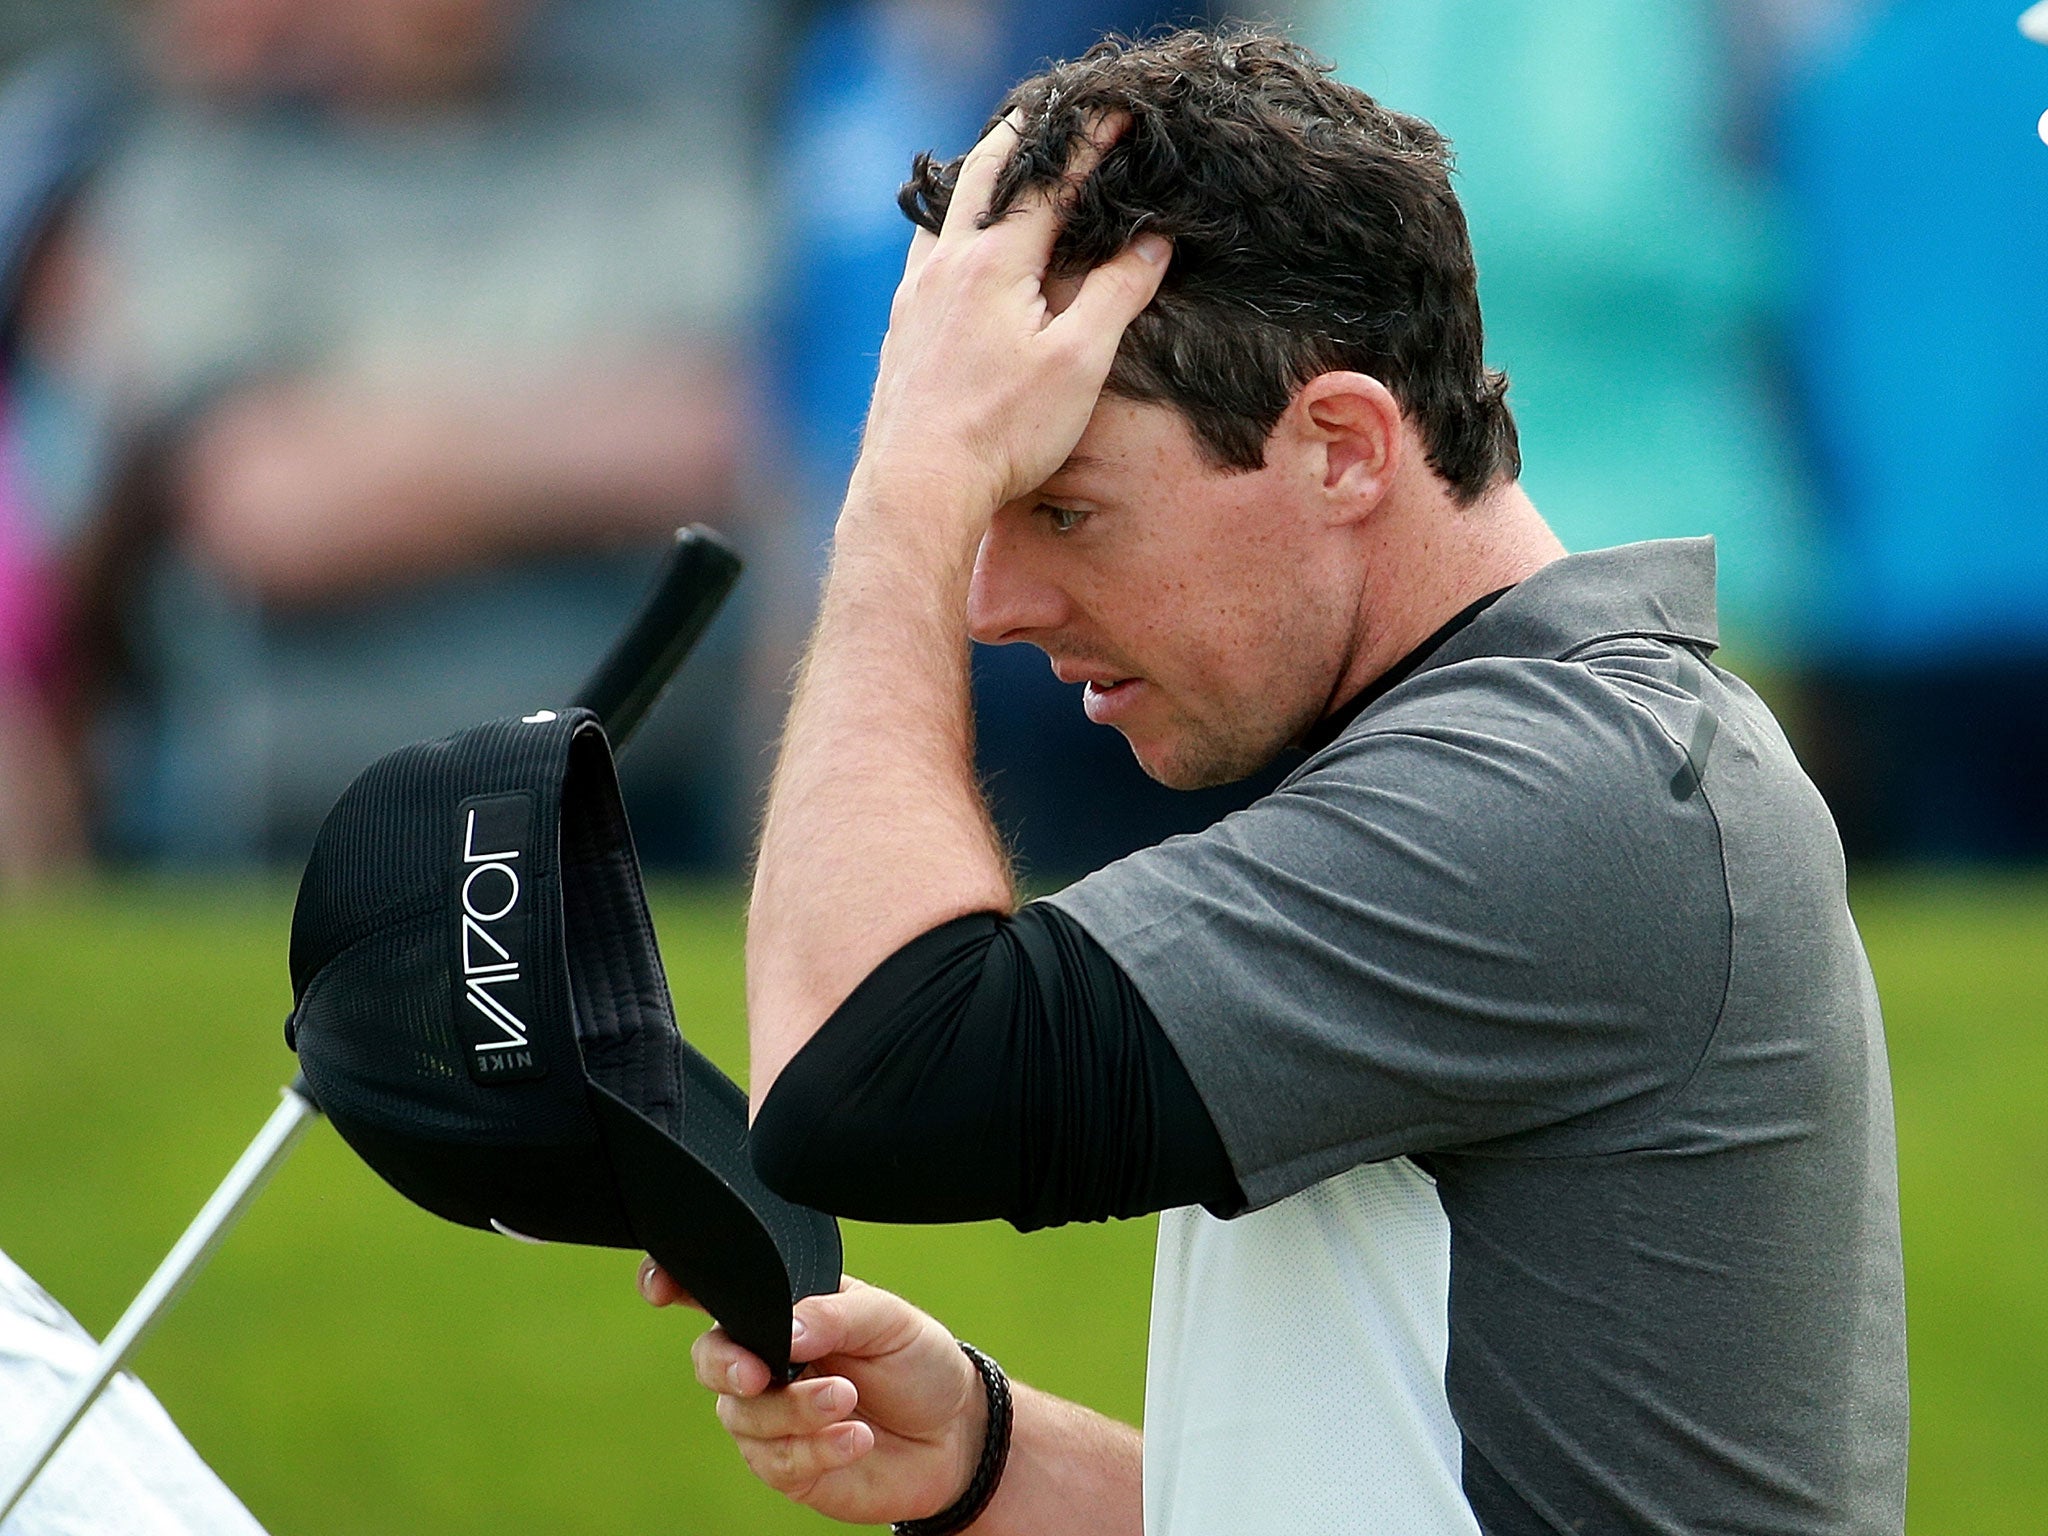 Rory McIlroy can’t believe it as he struggles through the second round, finishing on 78